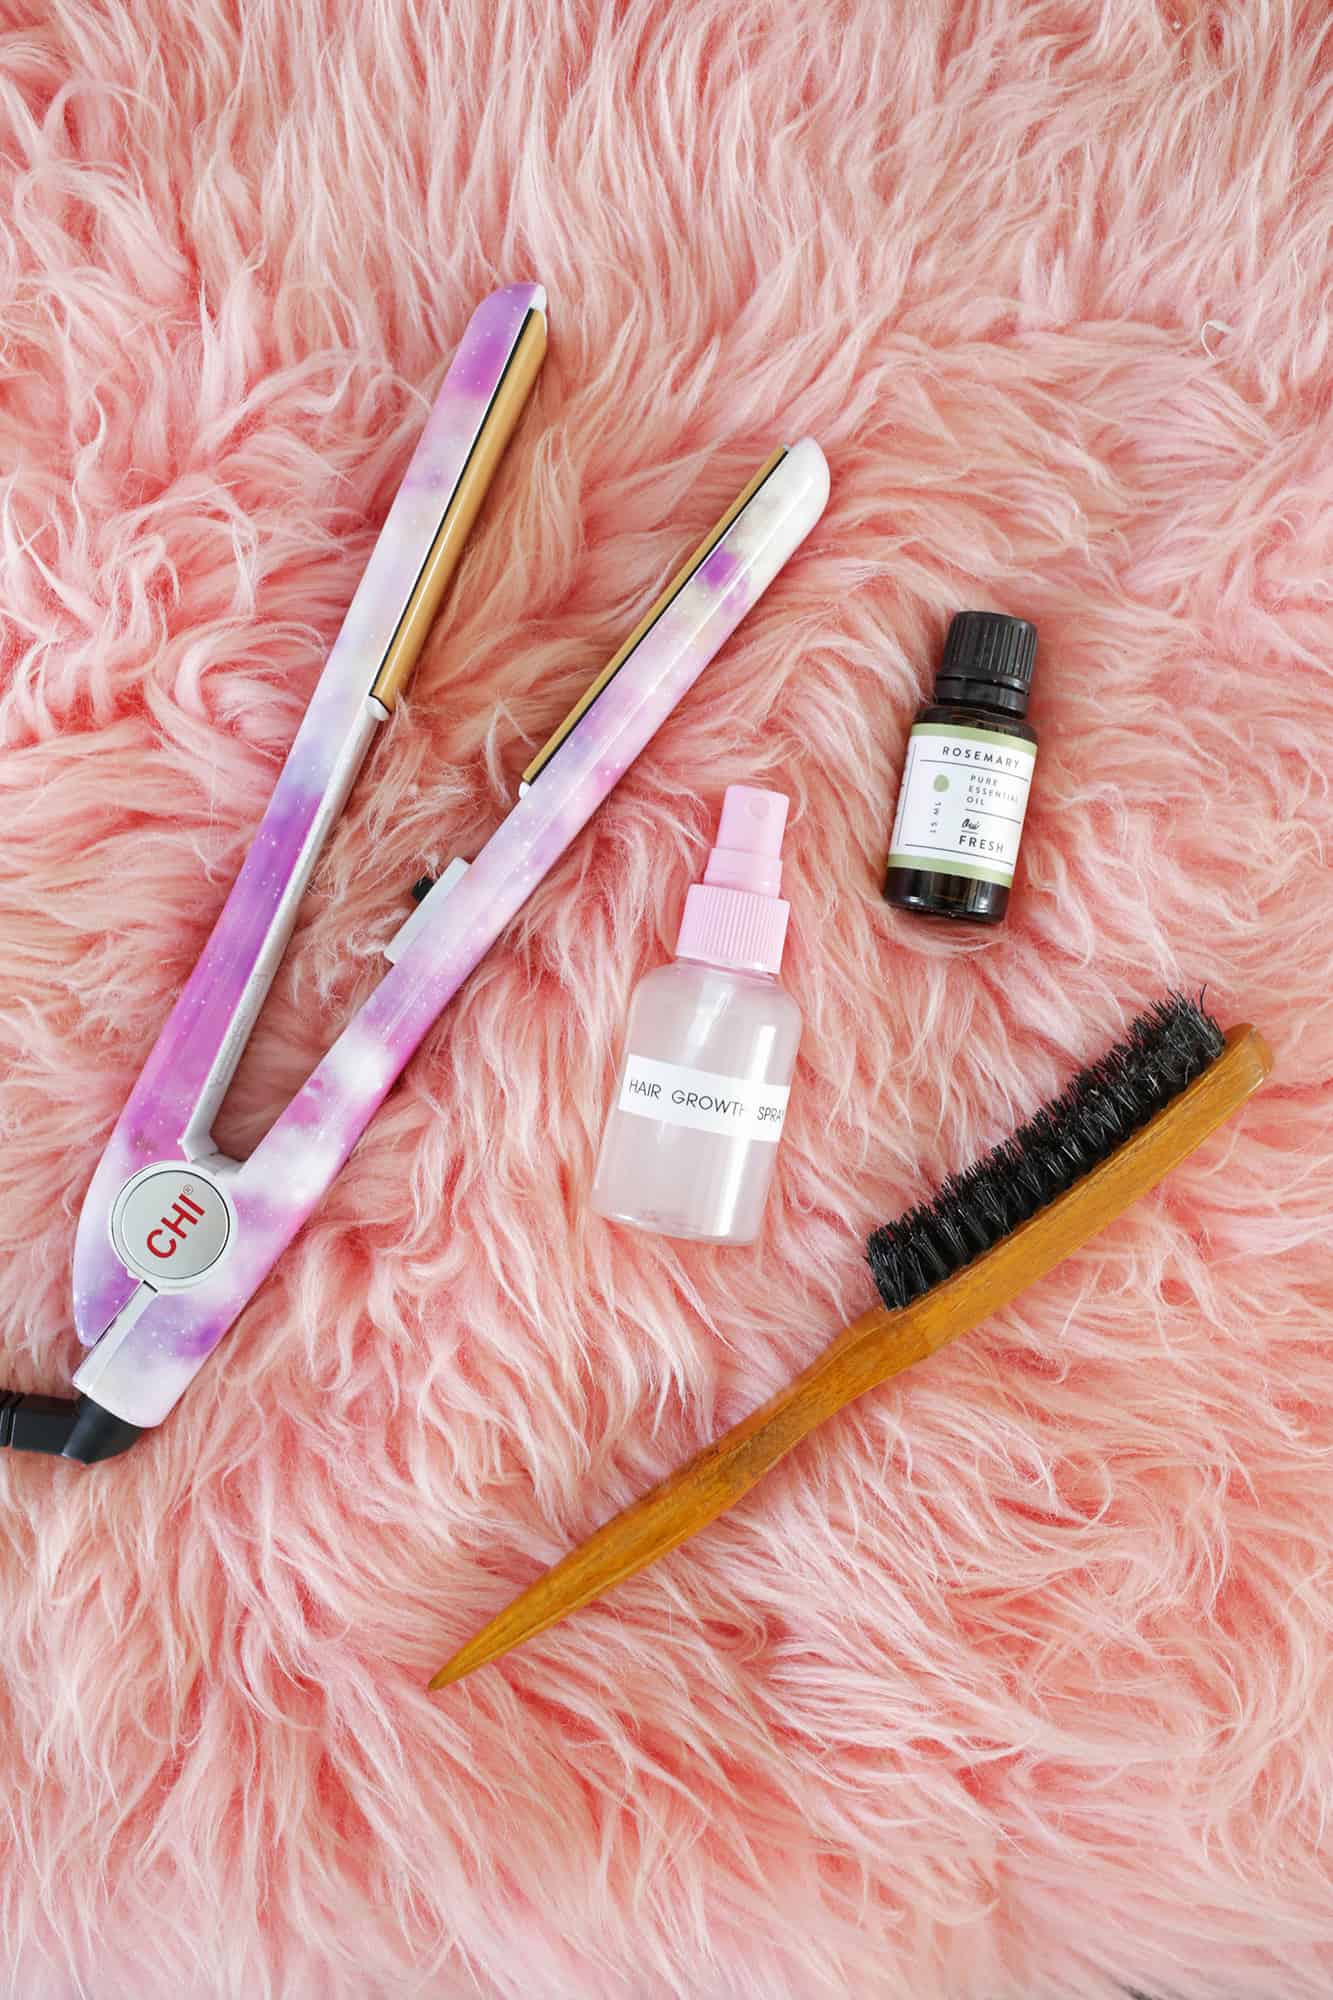 a curling iron, hair growth spray, Rosemary essential oil, and a hairbrush on a pink fluffy rug